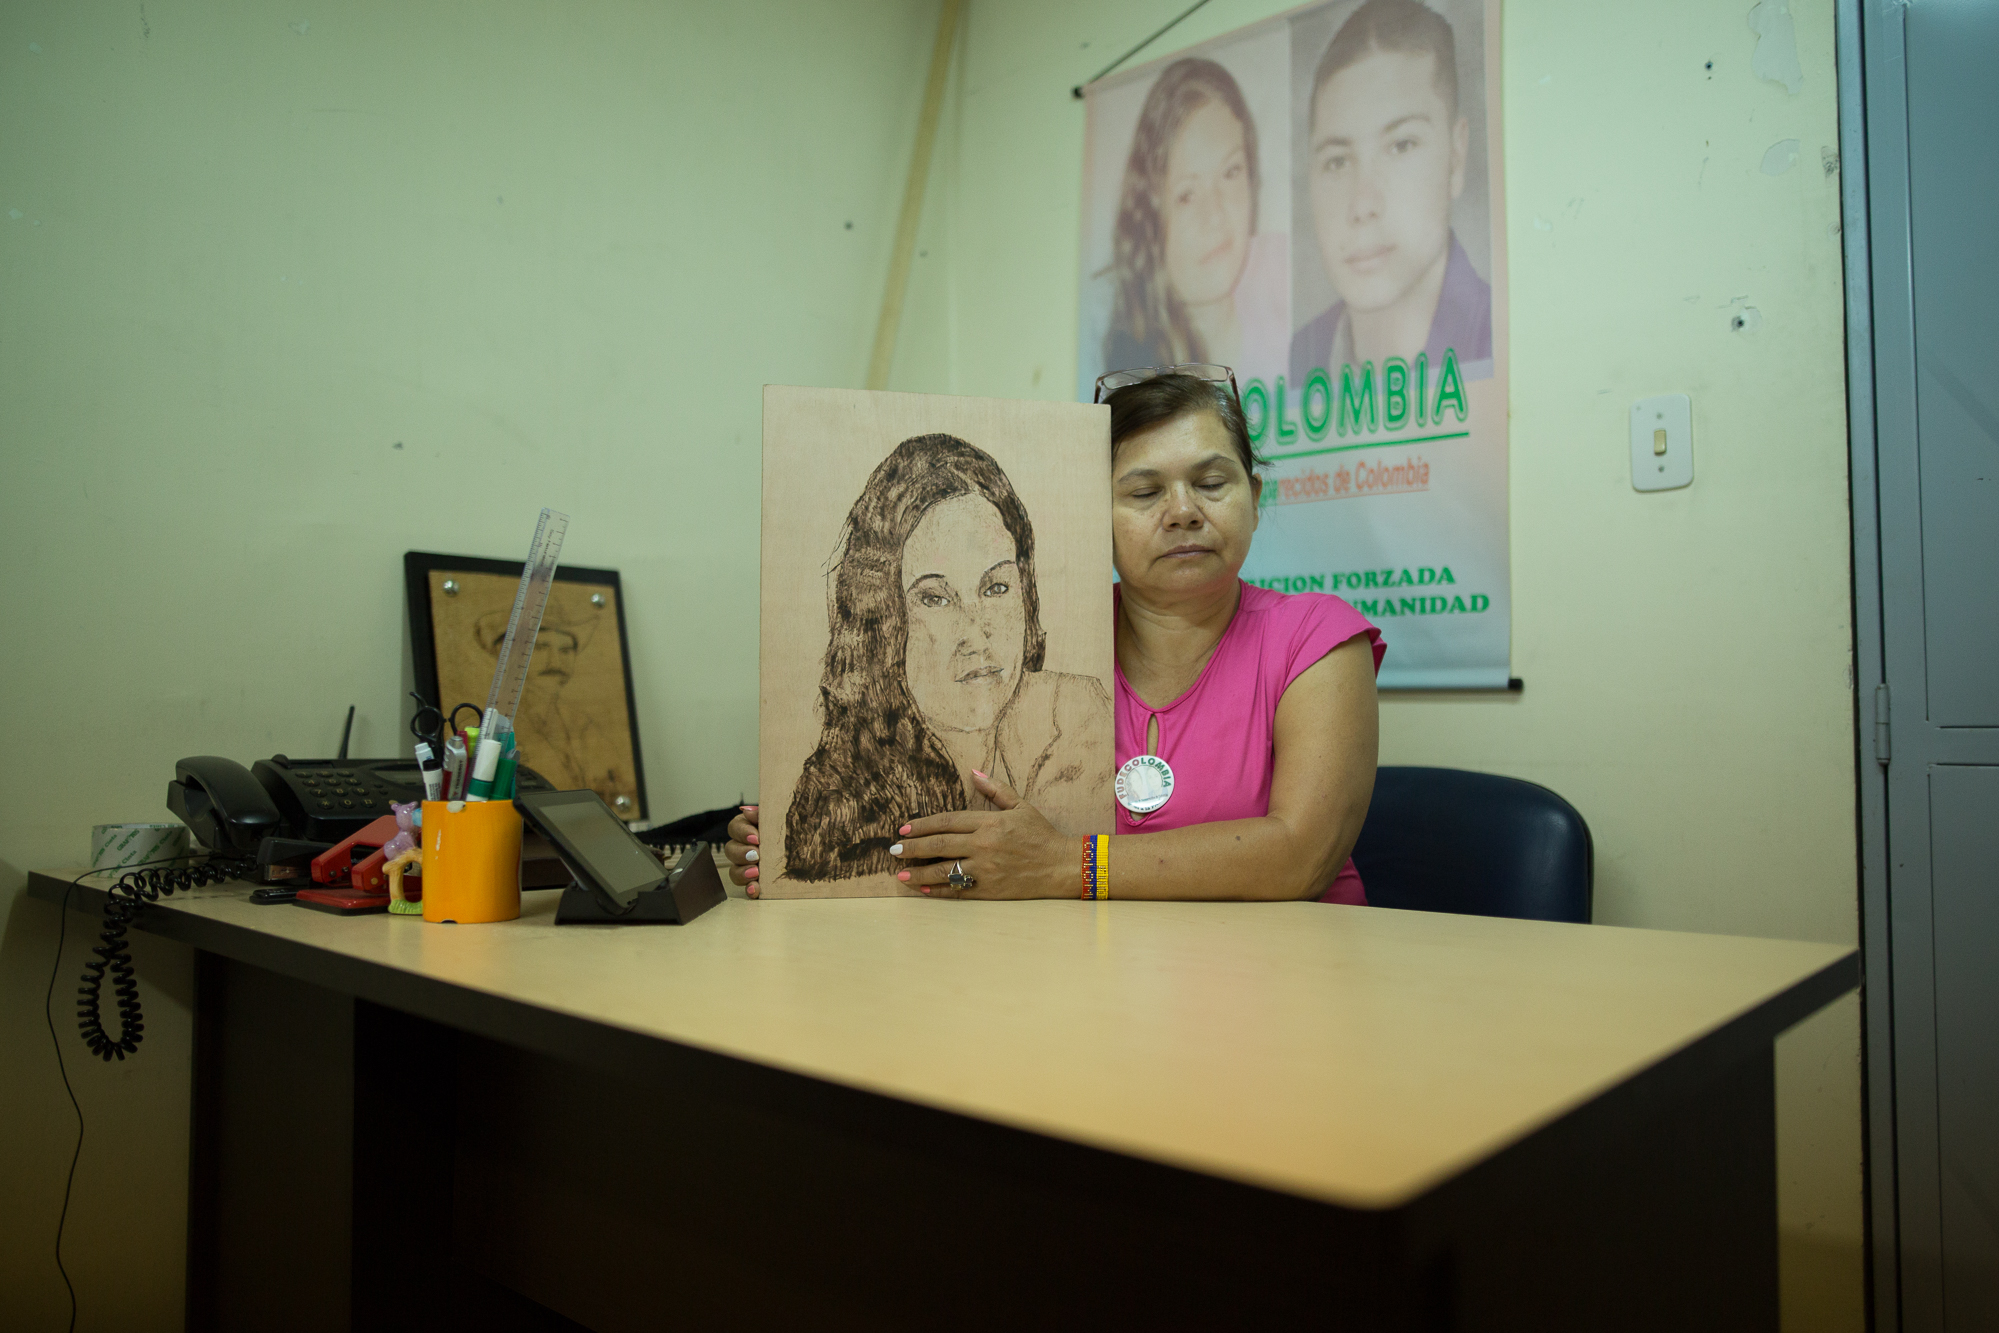  Imelda Olivia Martinez Reyes, 56, sits with a portrait of her daughter who was disappeared in 2004 at the age of 16 years old. Her son was also disappeared, presumably by paramilitaries, for her involvement in the Union Patriotica. She formed FUDECO